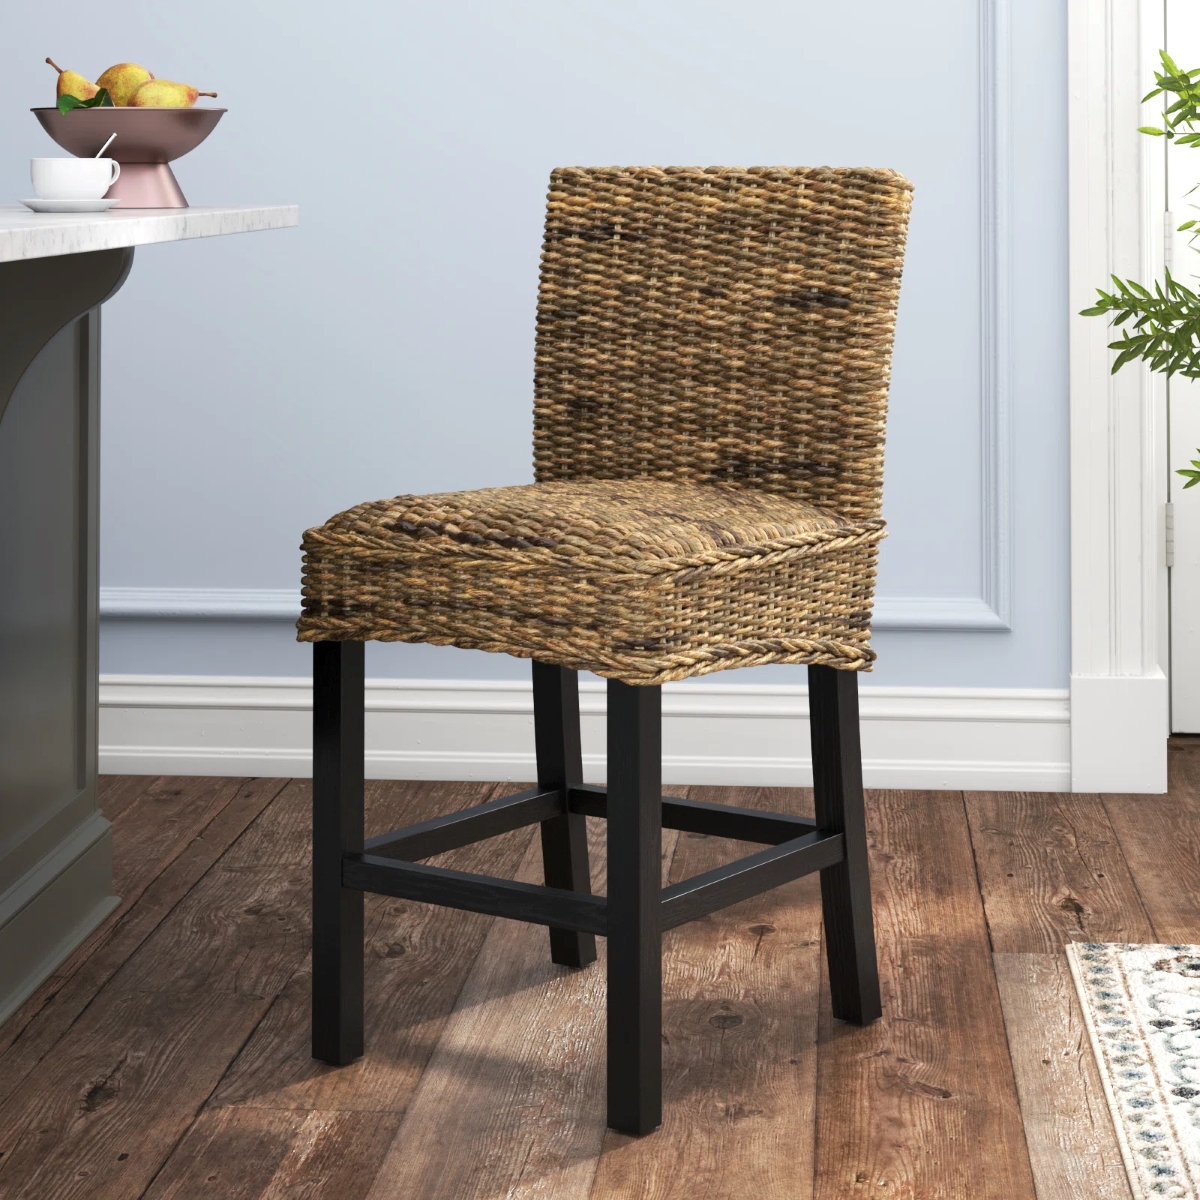 A kitchen island stool with wicker rattan seat.